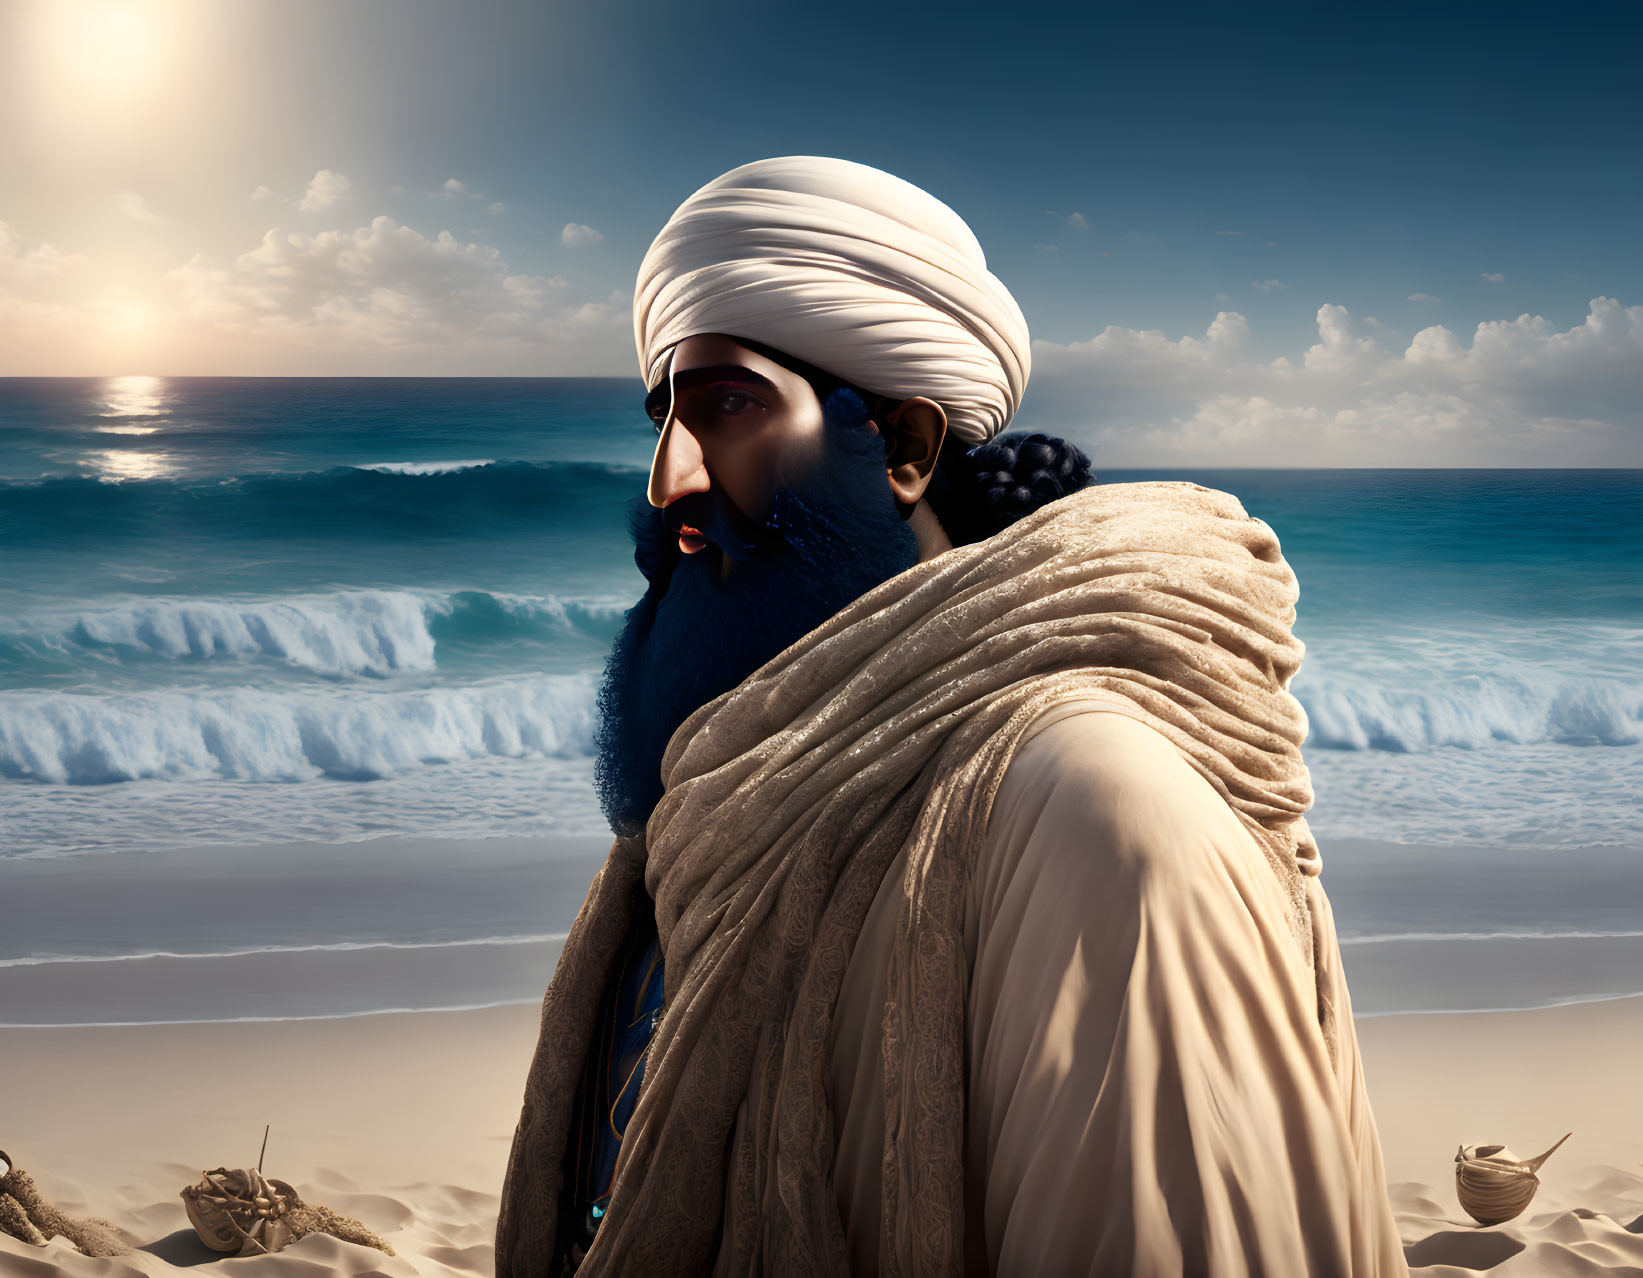 Bearded Man in White Turban Contemplates Sea at Sunset